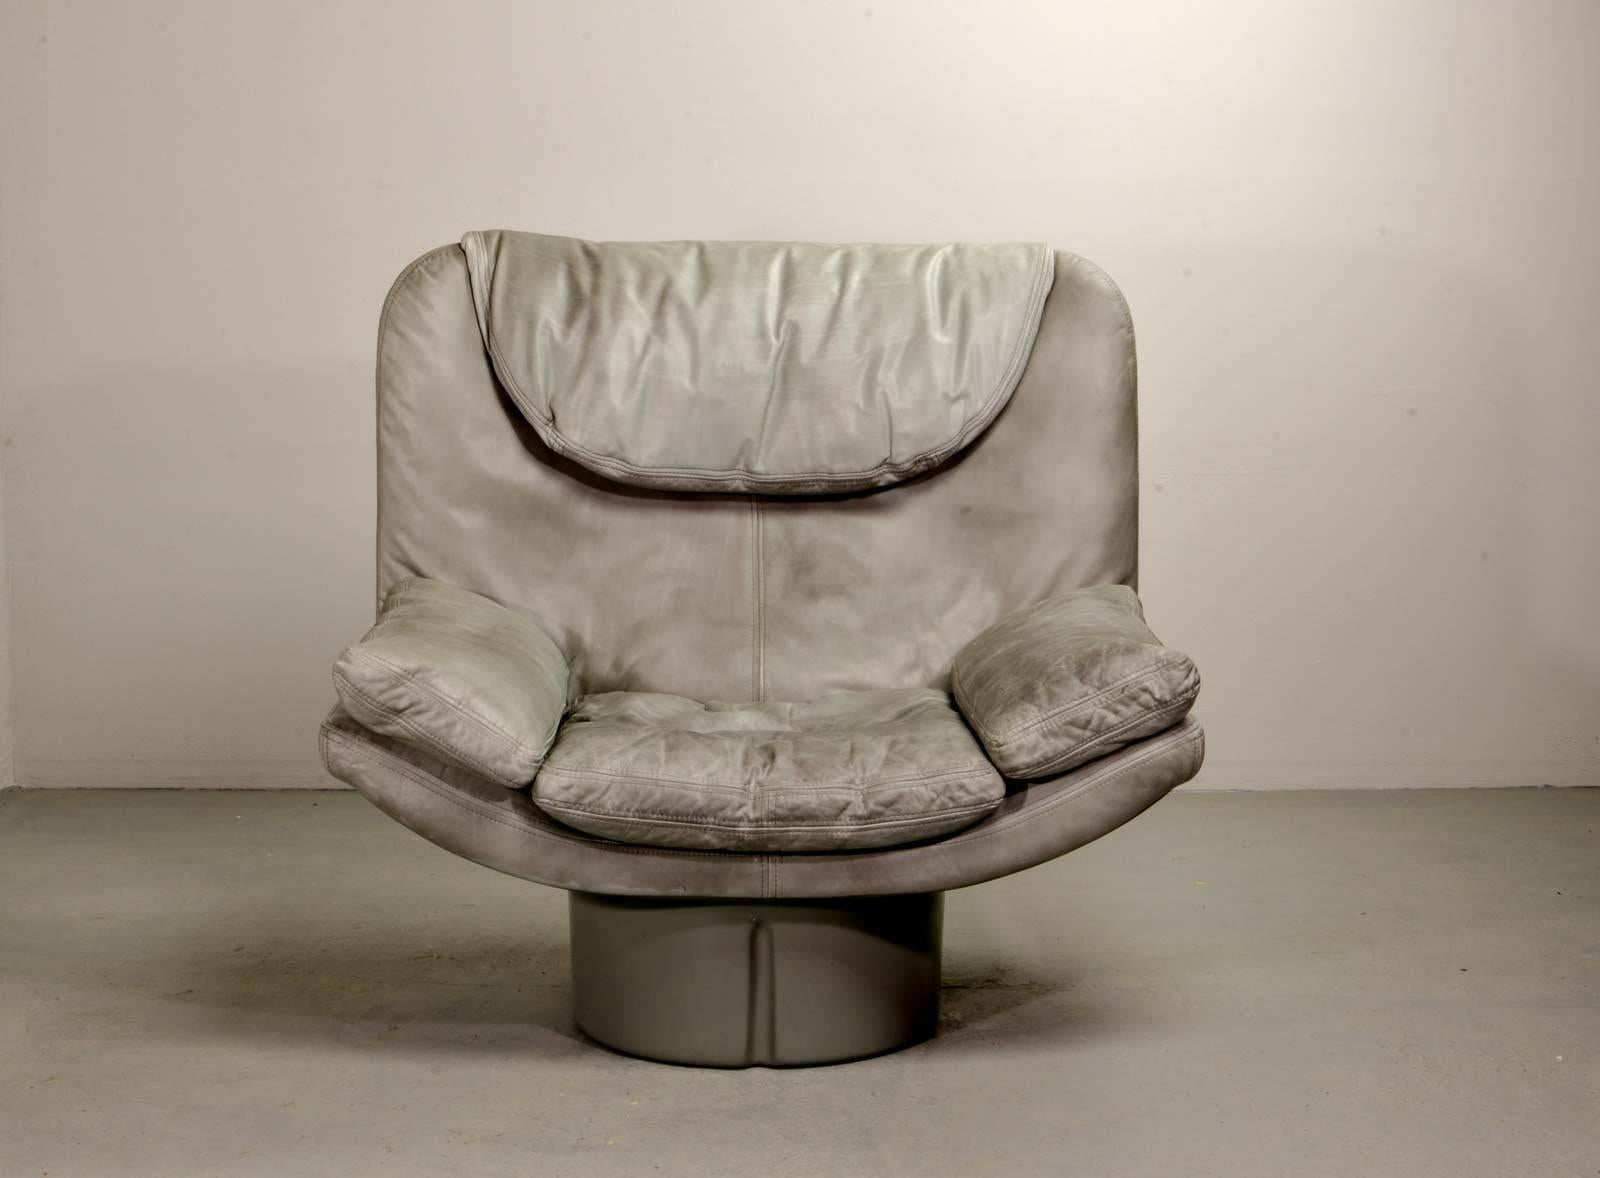 Very comfortable Italian design leather lounge chair. This chair is designed in the 1970s, by Titiana Ammanati and Giampiero Vitelli for Comfort in Italy. The grey leather upholstery shows a beautiful patine and the sturdy polyester shell is a real